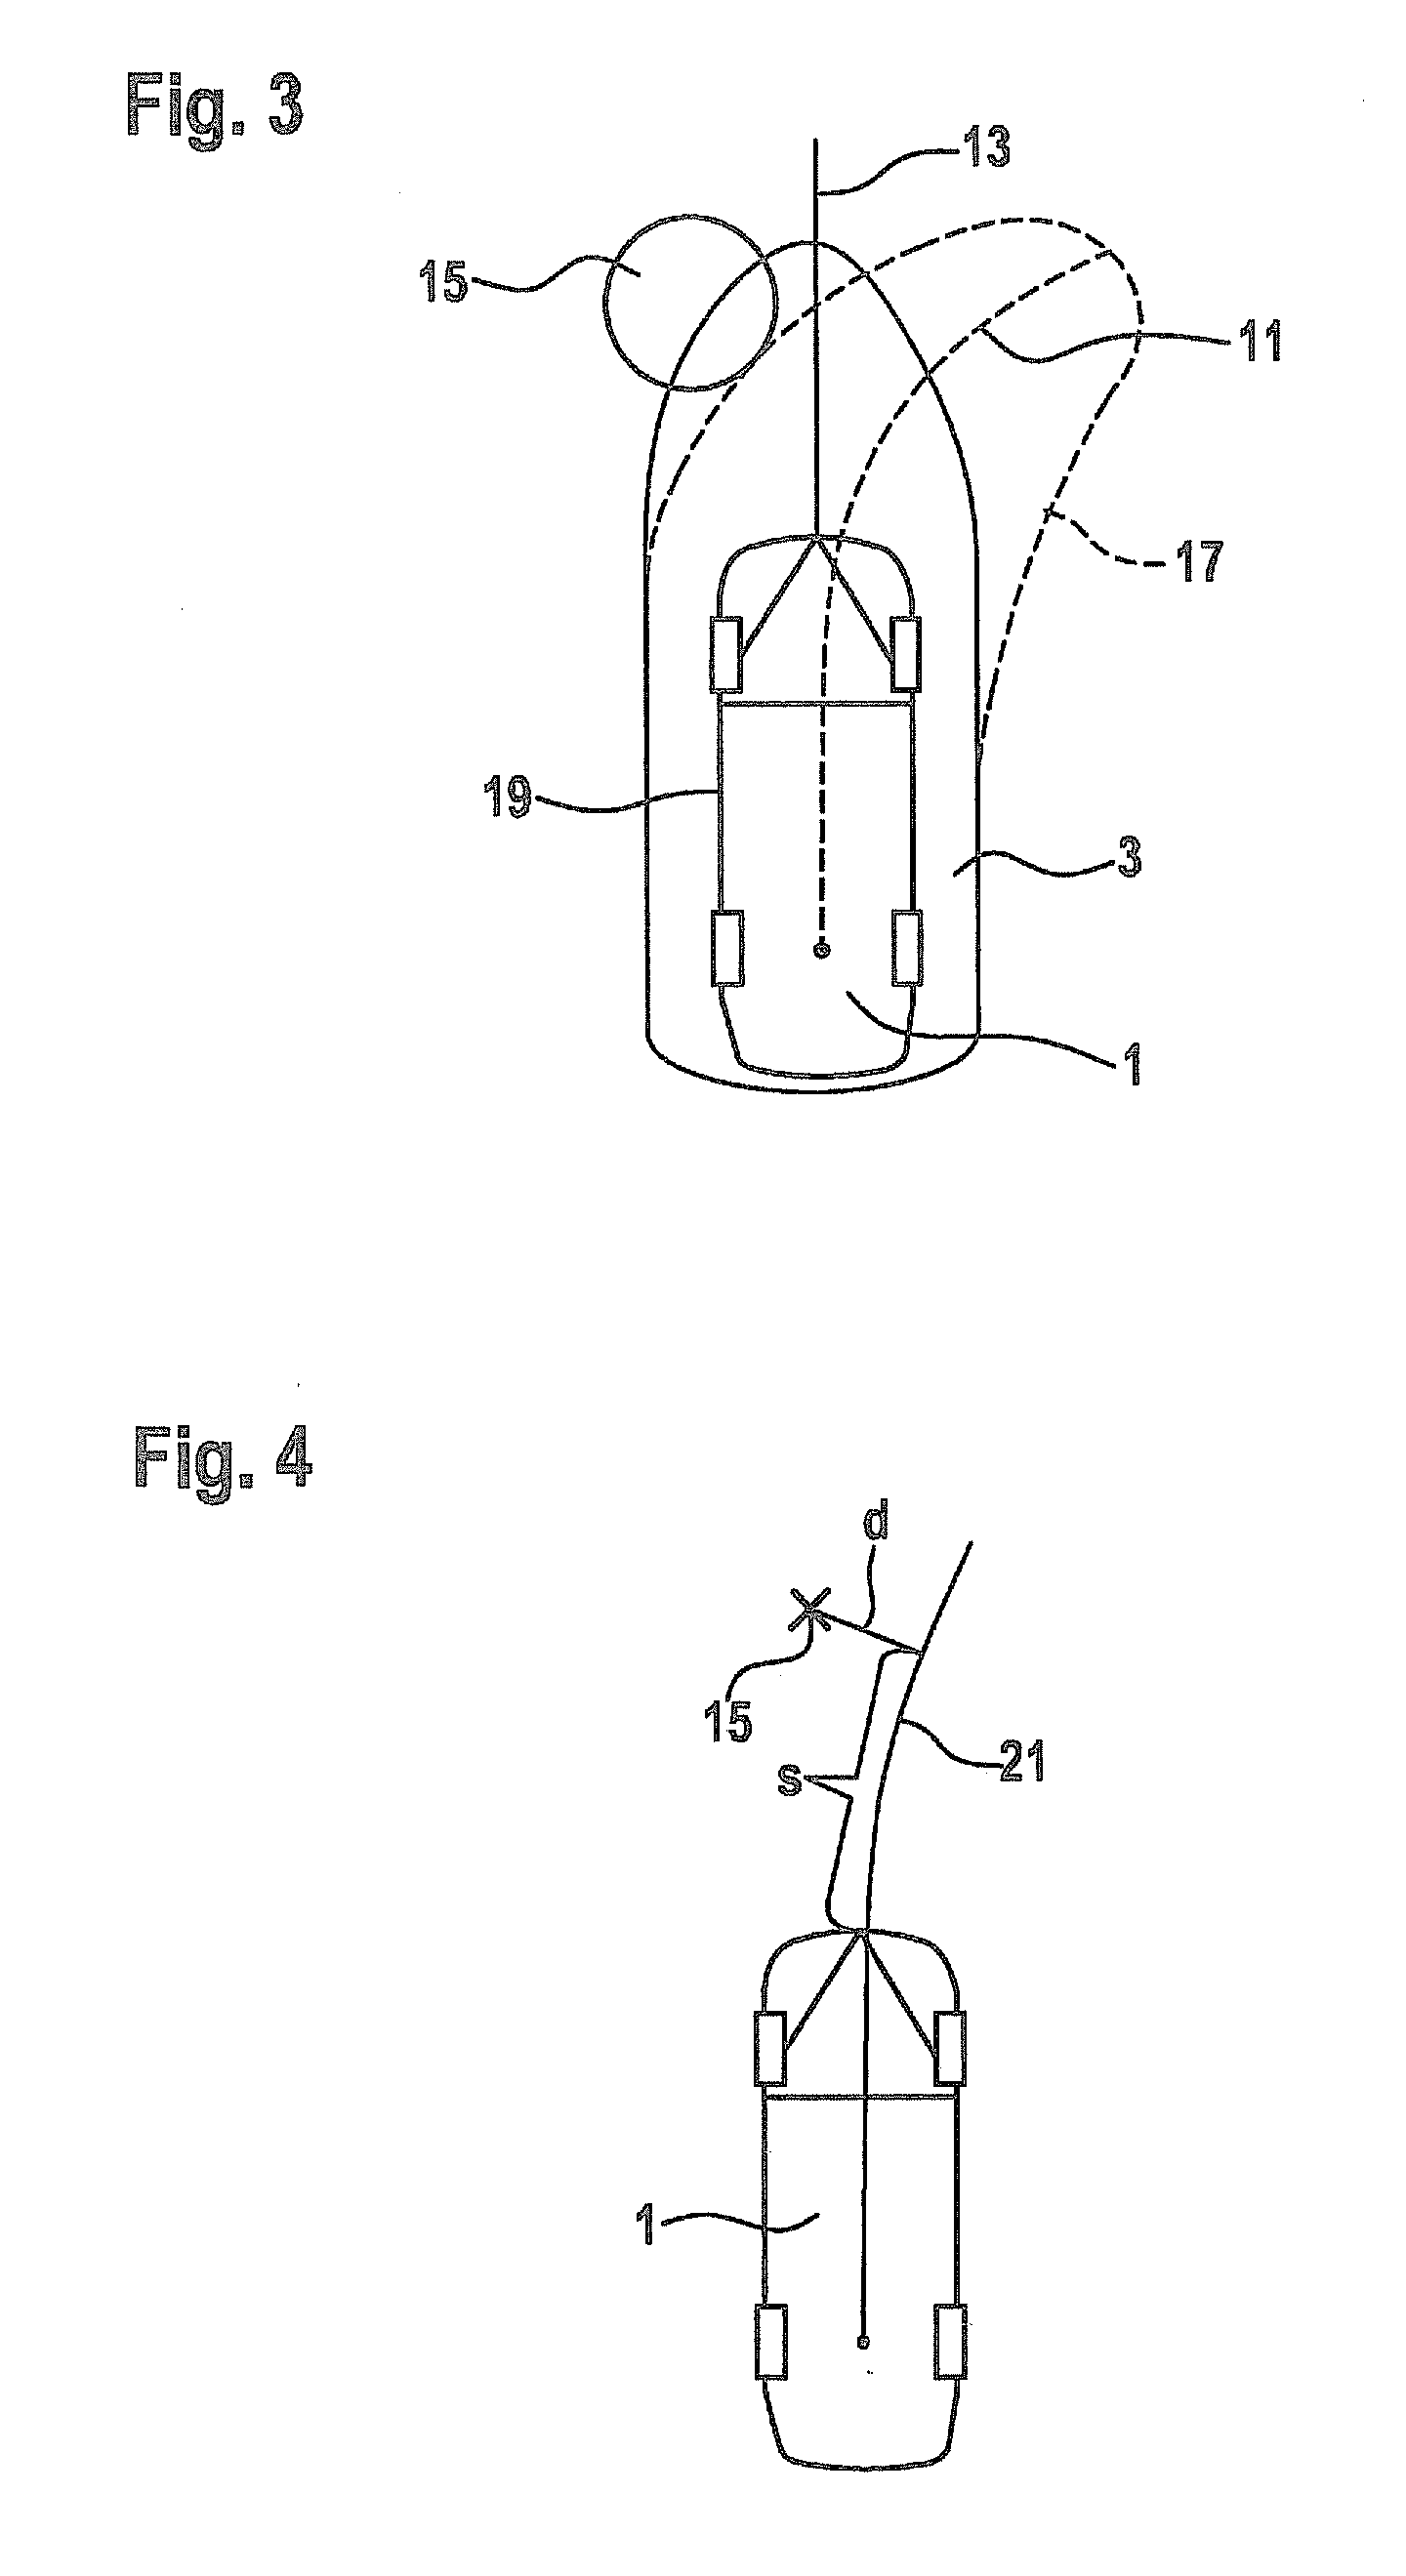 Method for assisting a driver of a vehicle during a driving maneuver